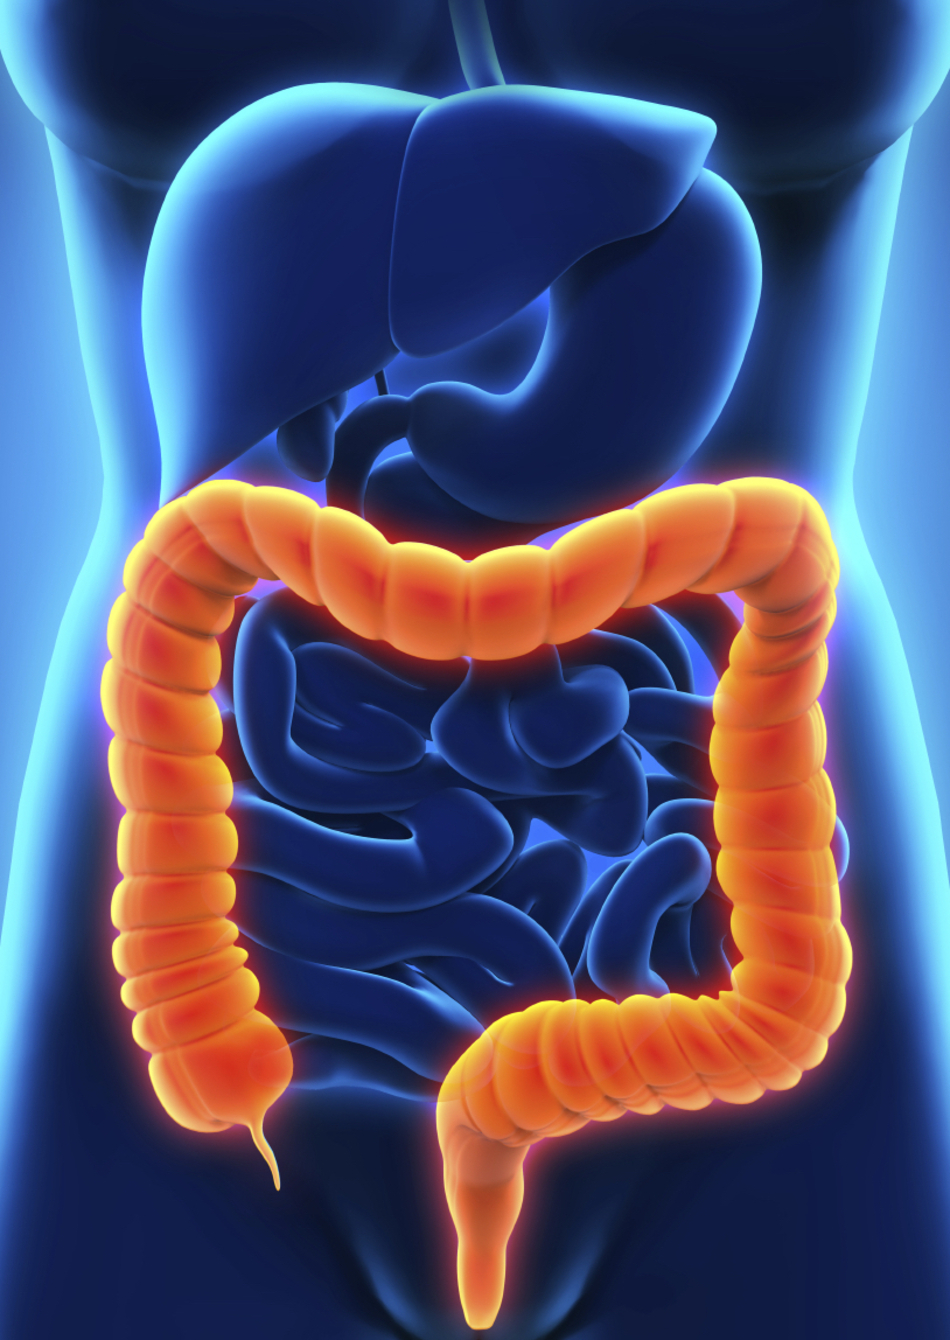 Overwhelmed with Information on Colorectal Cancer Treatment? Talk to Your Doctor